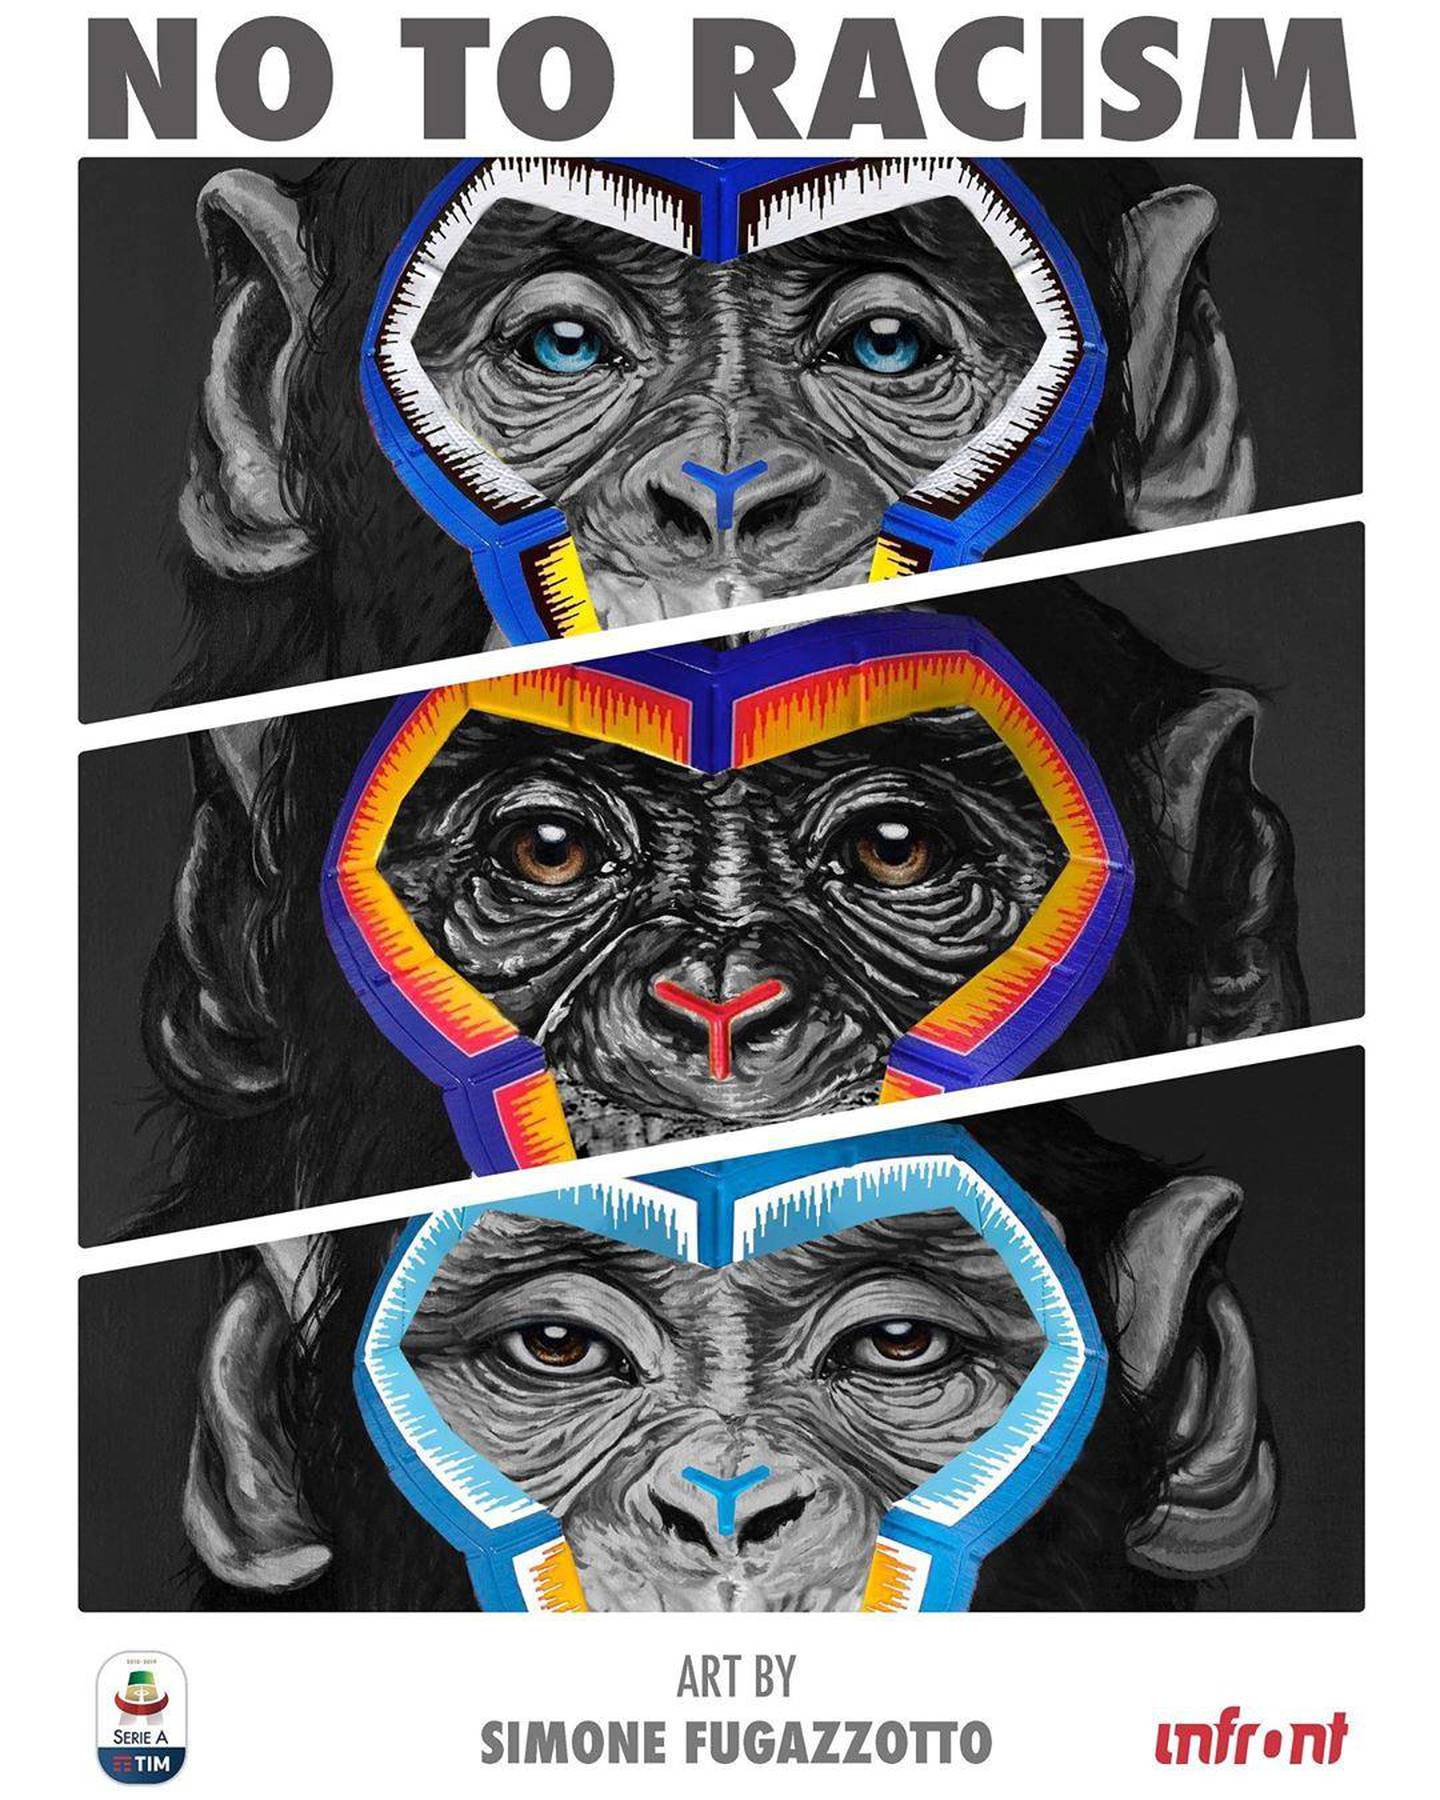 An anti-racism graphic image by Italian artist Simone Fugazzotto featuring three pictures of apes under the words "NO TO RACISM" designed for Italian soccer league Serie A, posted on Instagram on May 17, 2019. Simone Fugazzotto/Handout via REUTERS - ATTENTION EDITORS - THIS PICTURE WAS PROVIDED BY A THIRD PARTY. MANDATORY CREDIT.